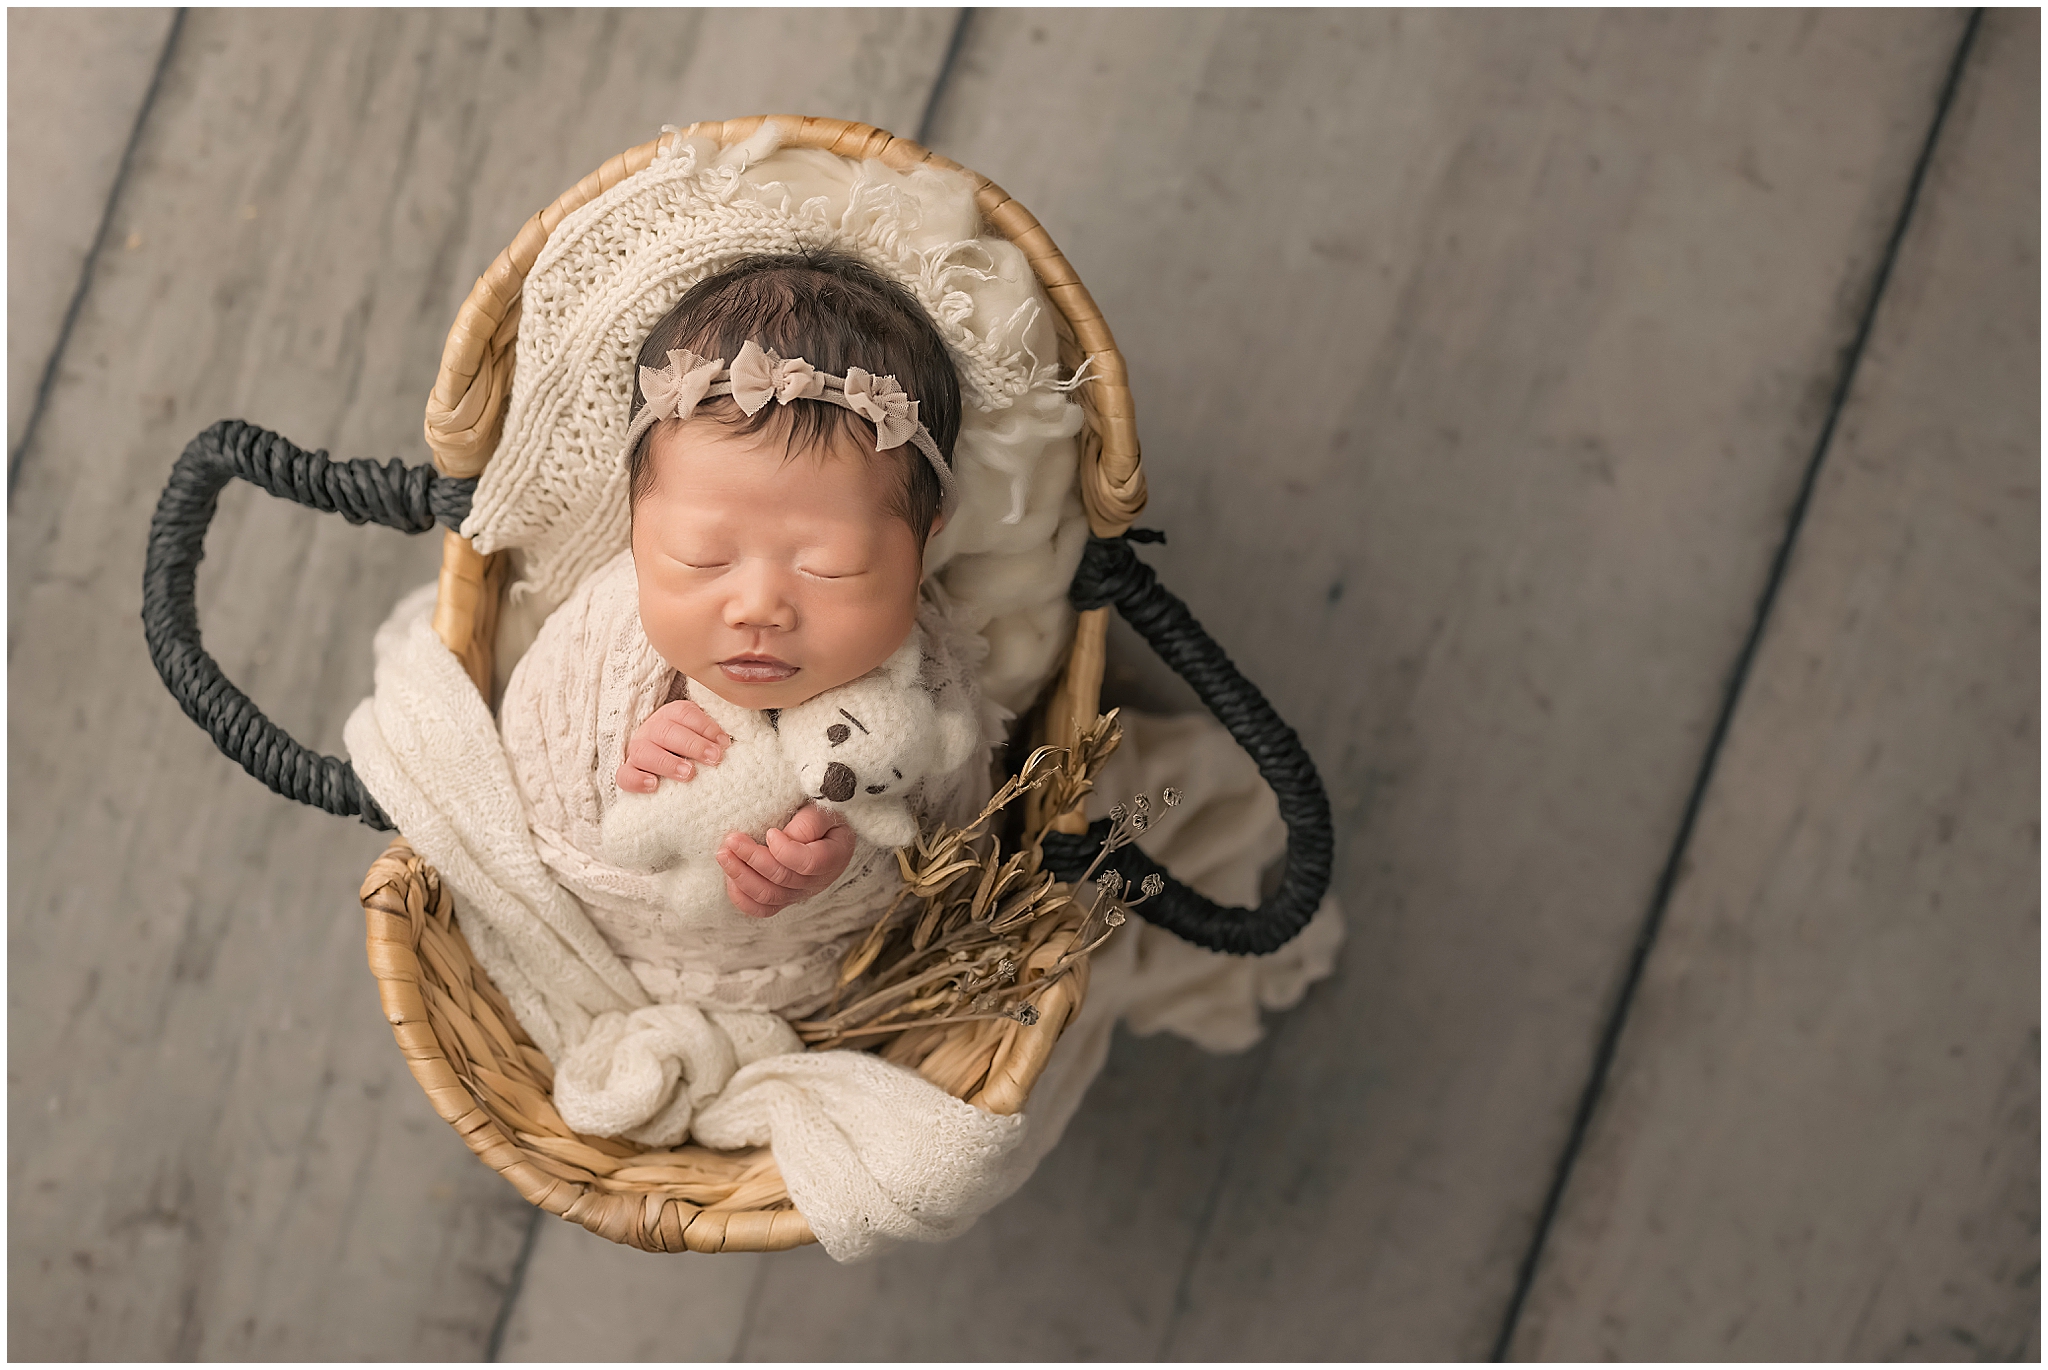 newborn baby holding bear in basket during newborn session in london ontario